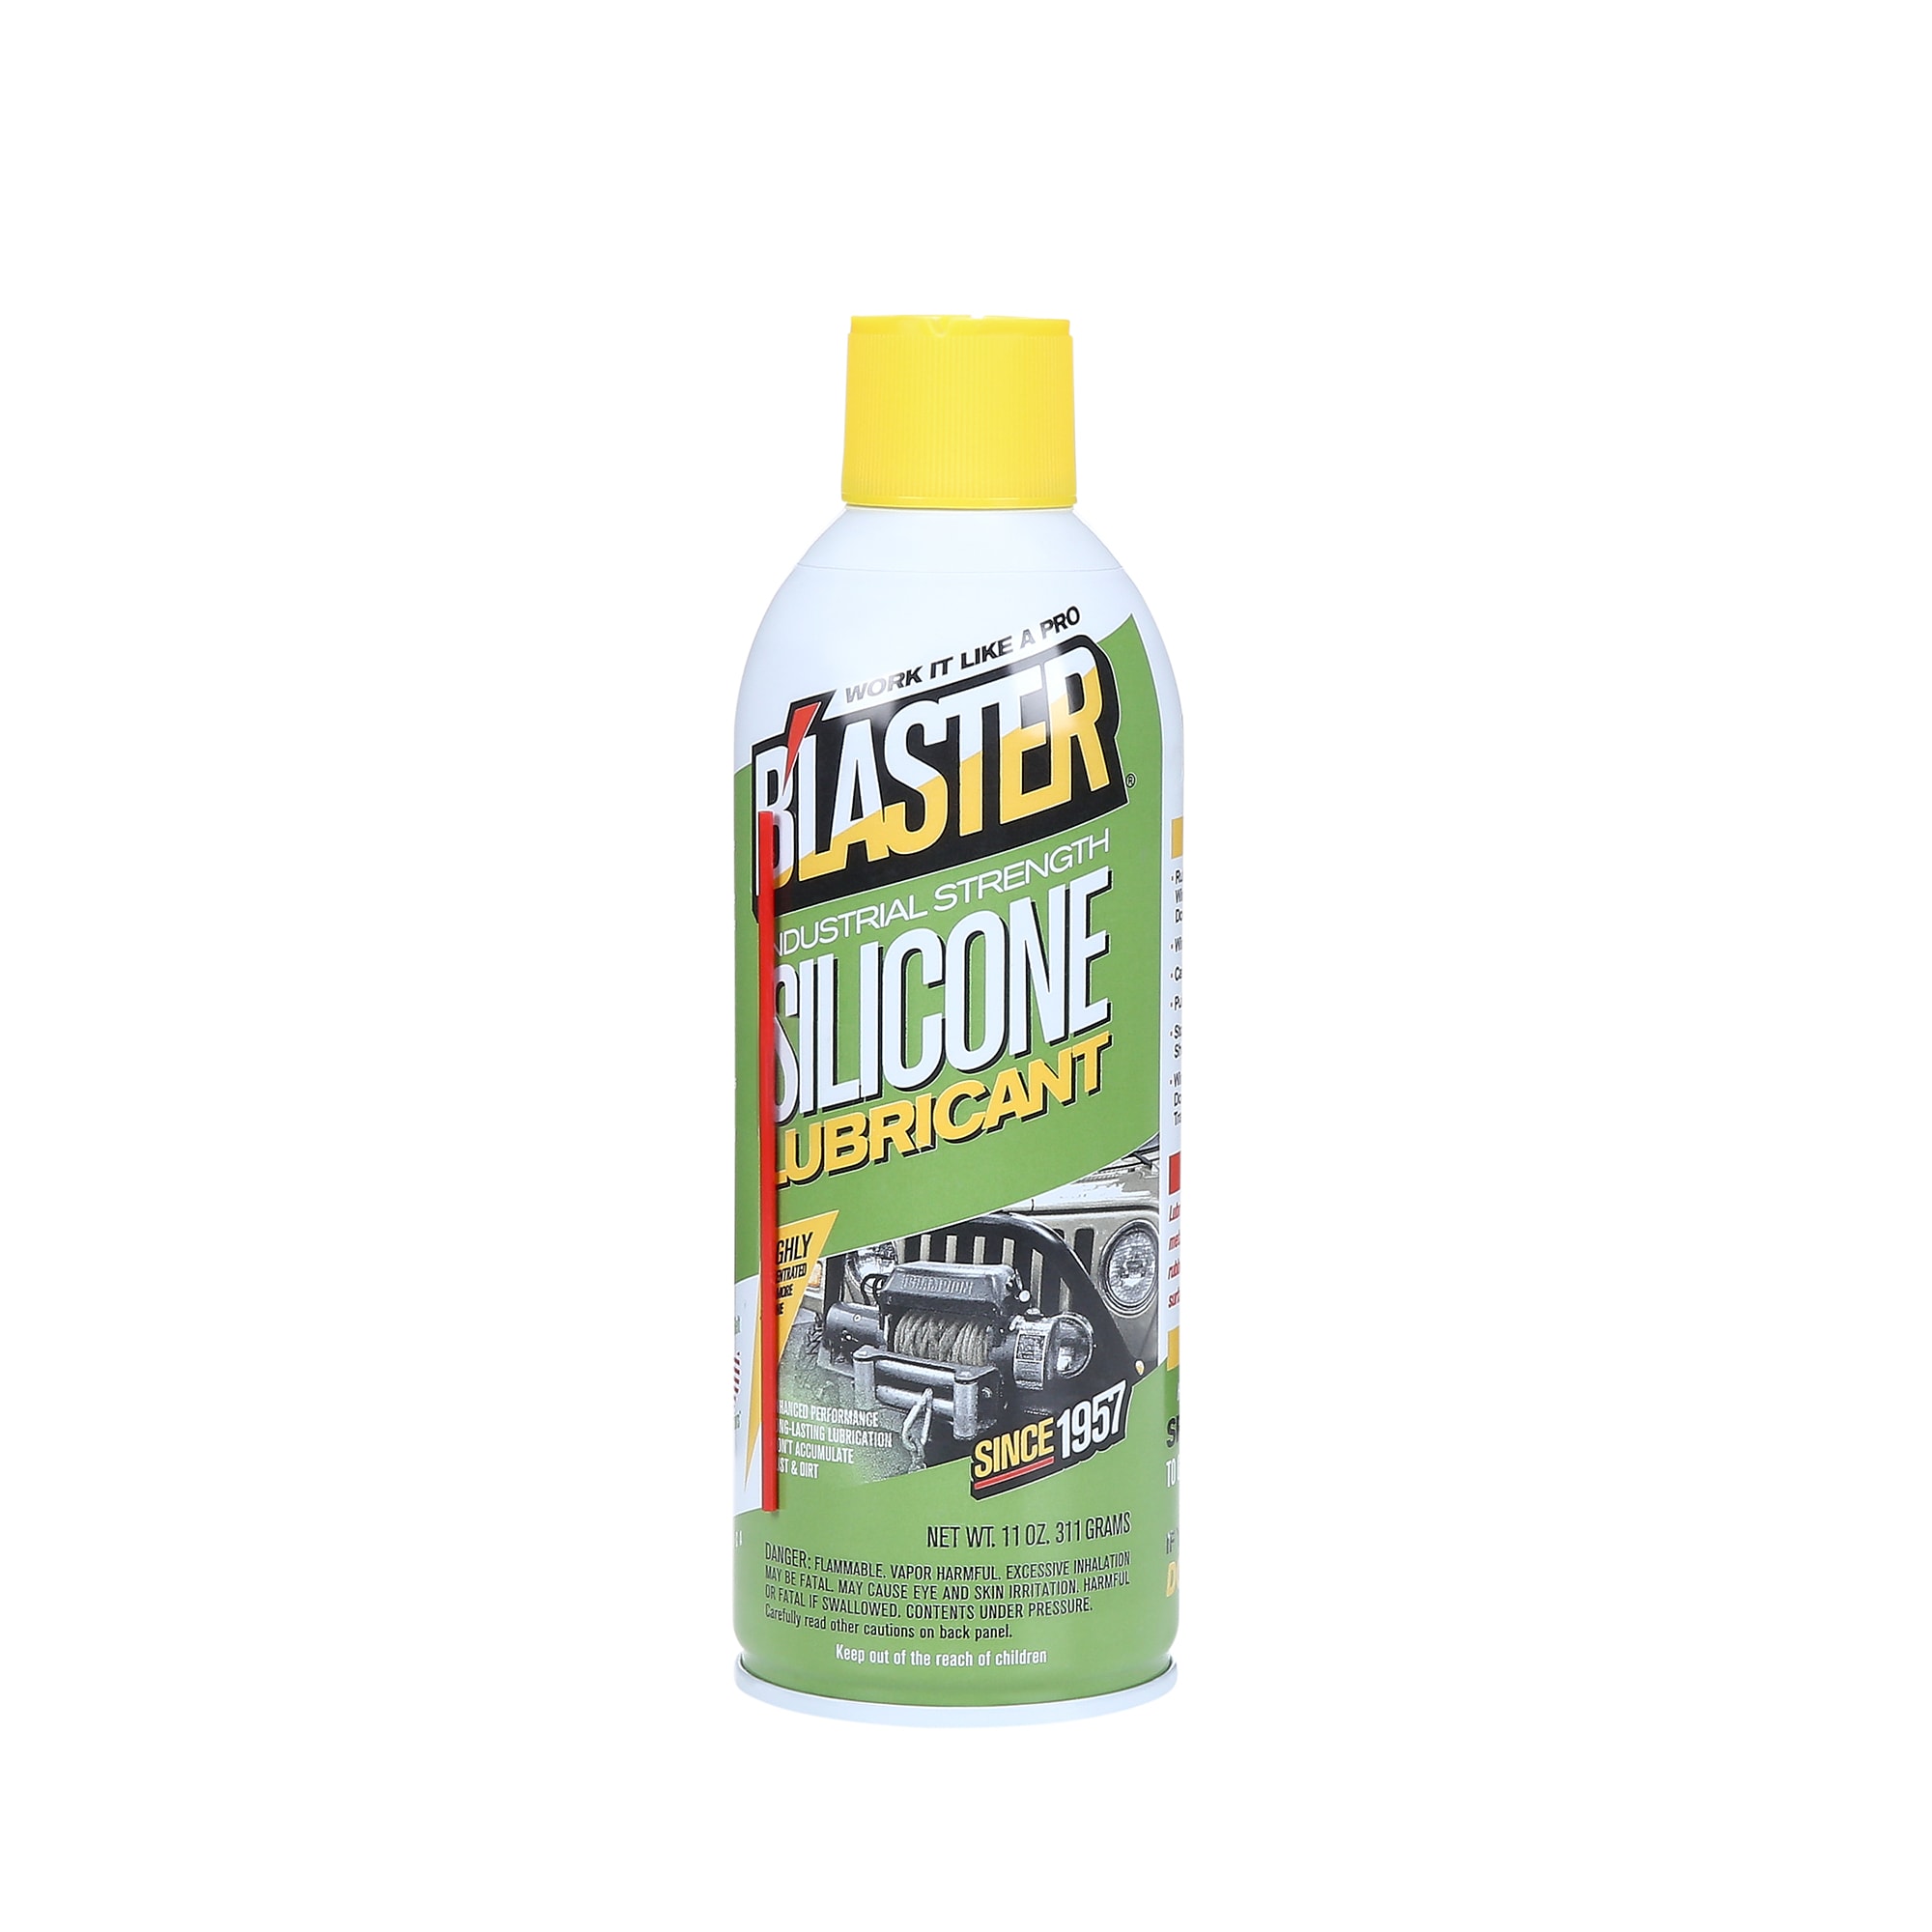 Blaster 11-oz Silicone Lube in the Hardware Lubricants department at